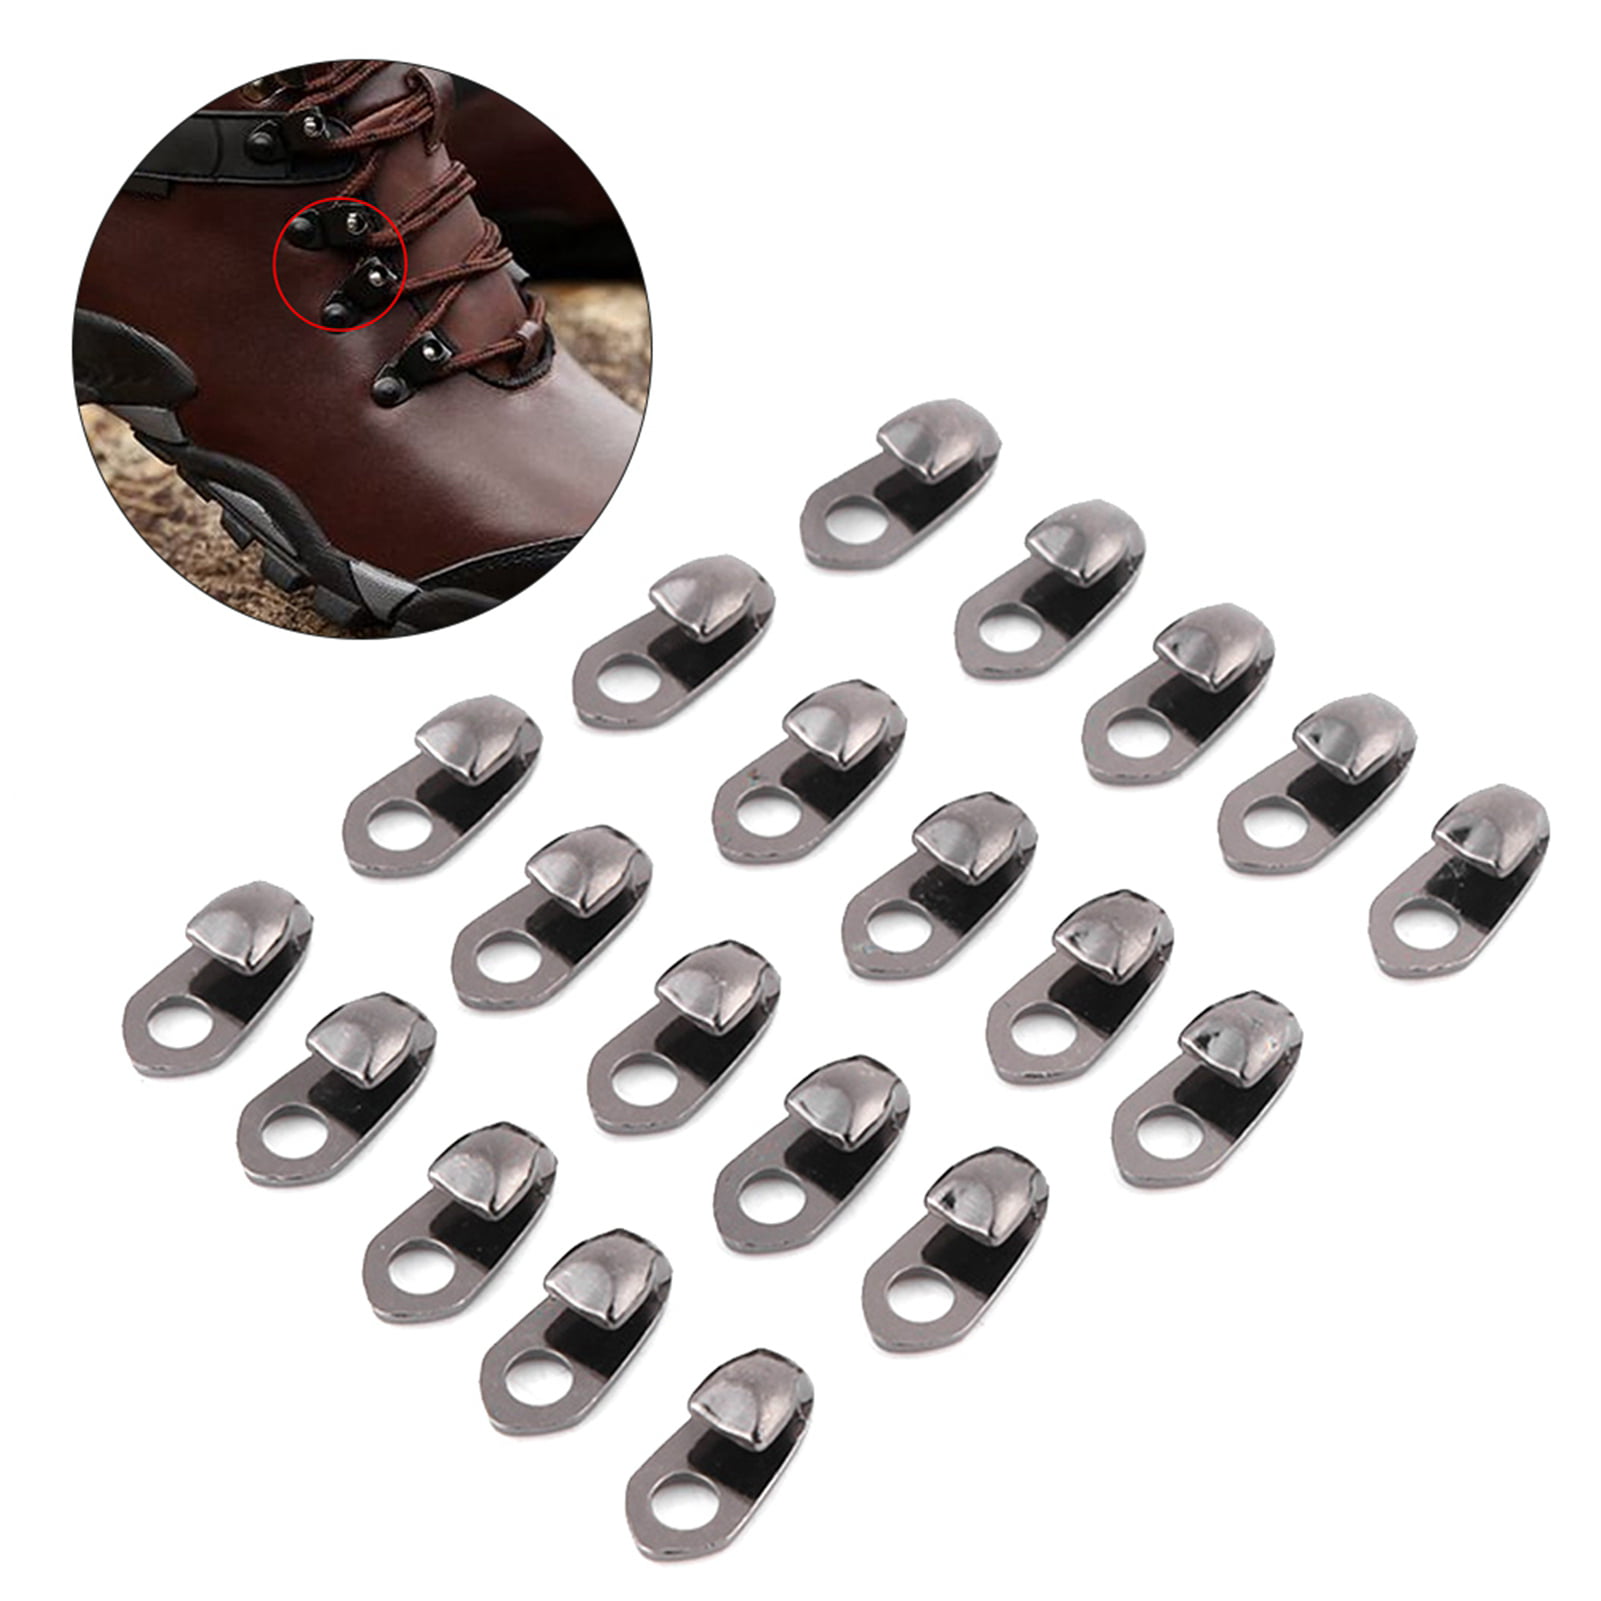  Boot Lace Hooks,20Set Alloy Boot Lace Hooks Lace Fittings with  Rivets Shoes Repair Buckle for Camp Hike Climbing Repair Leather Boot (Leg  Straps)